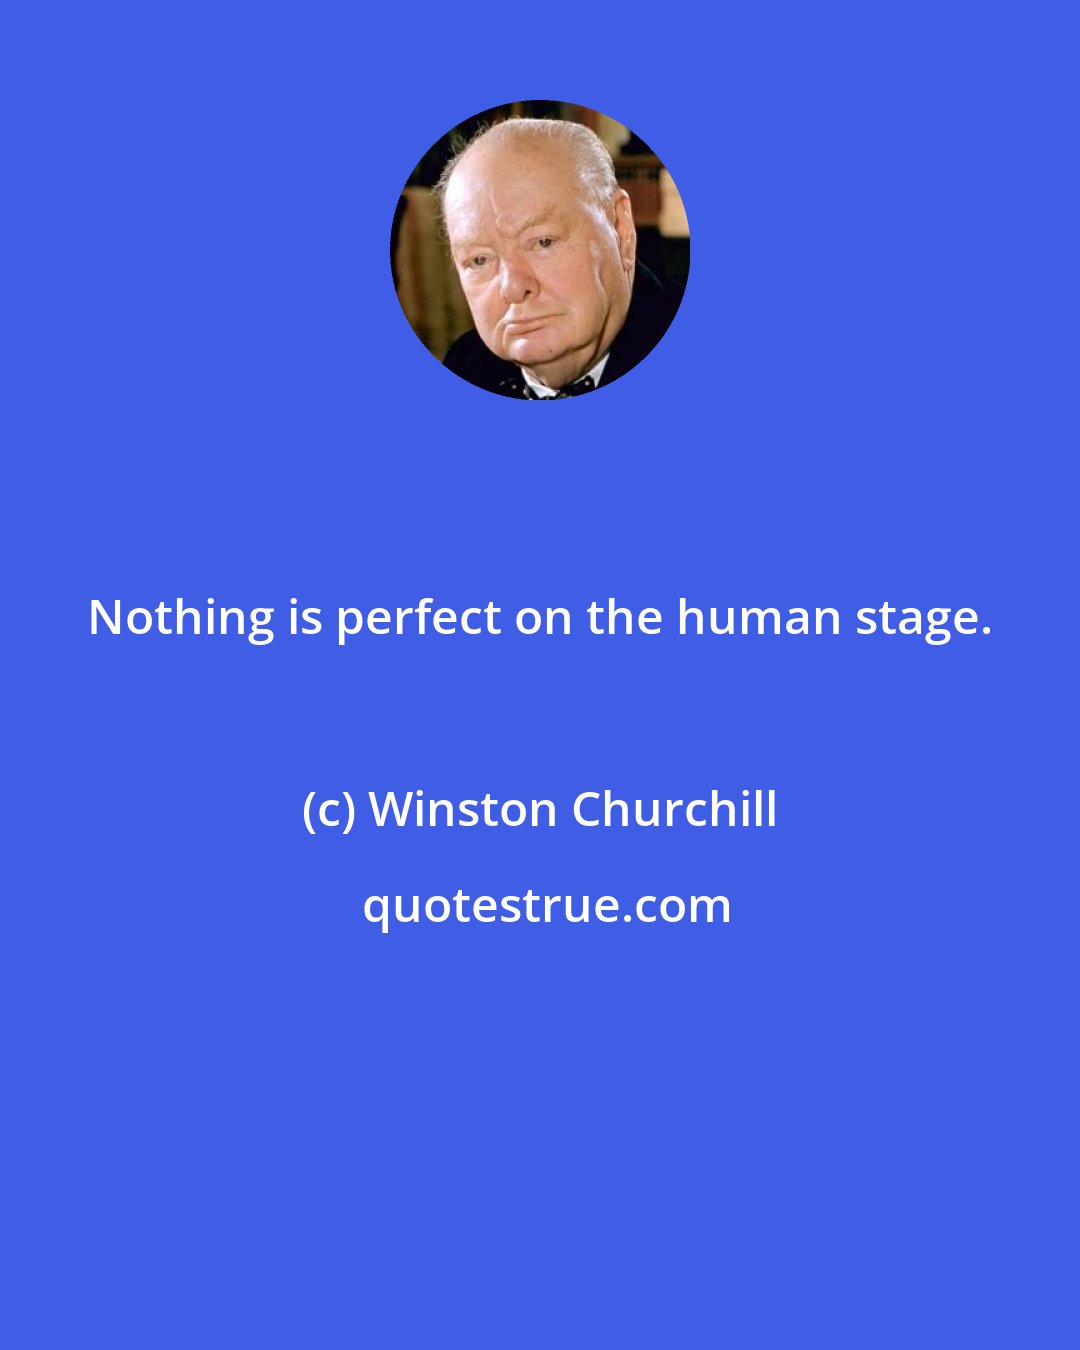 Winston Churchill: Nothing is perfect on the human stage.